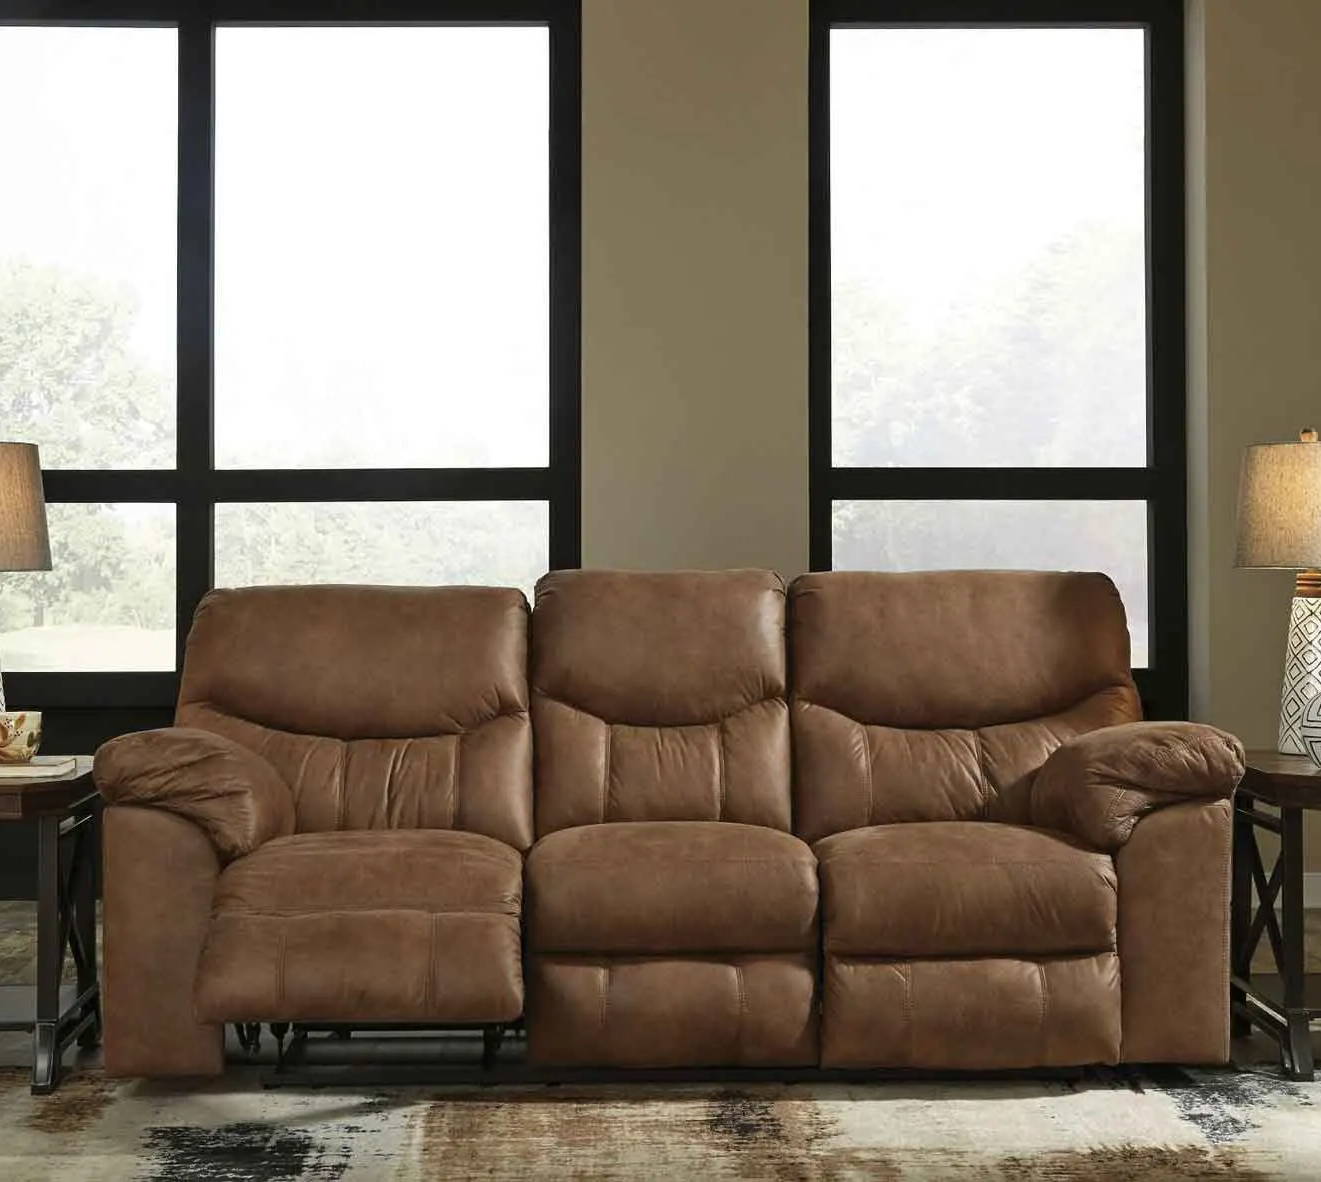 Ikea Vs Ashley Sofas Reviews, Ashley Leather Couch Reviews